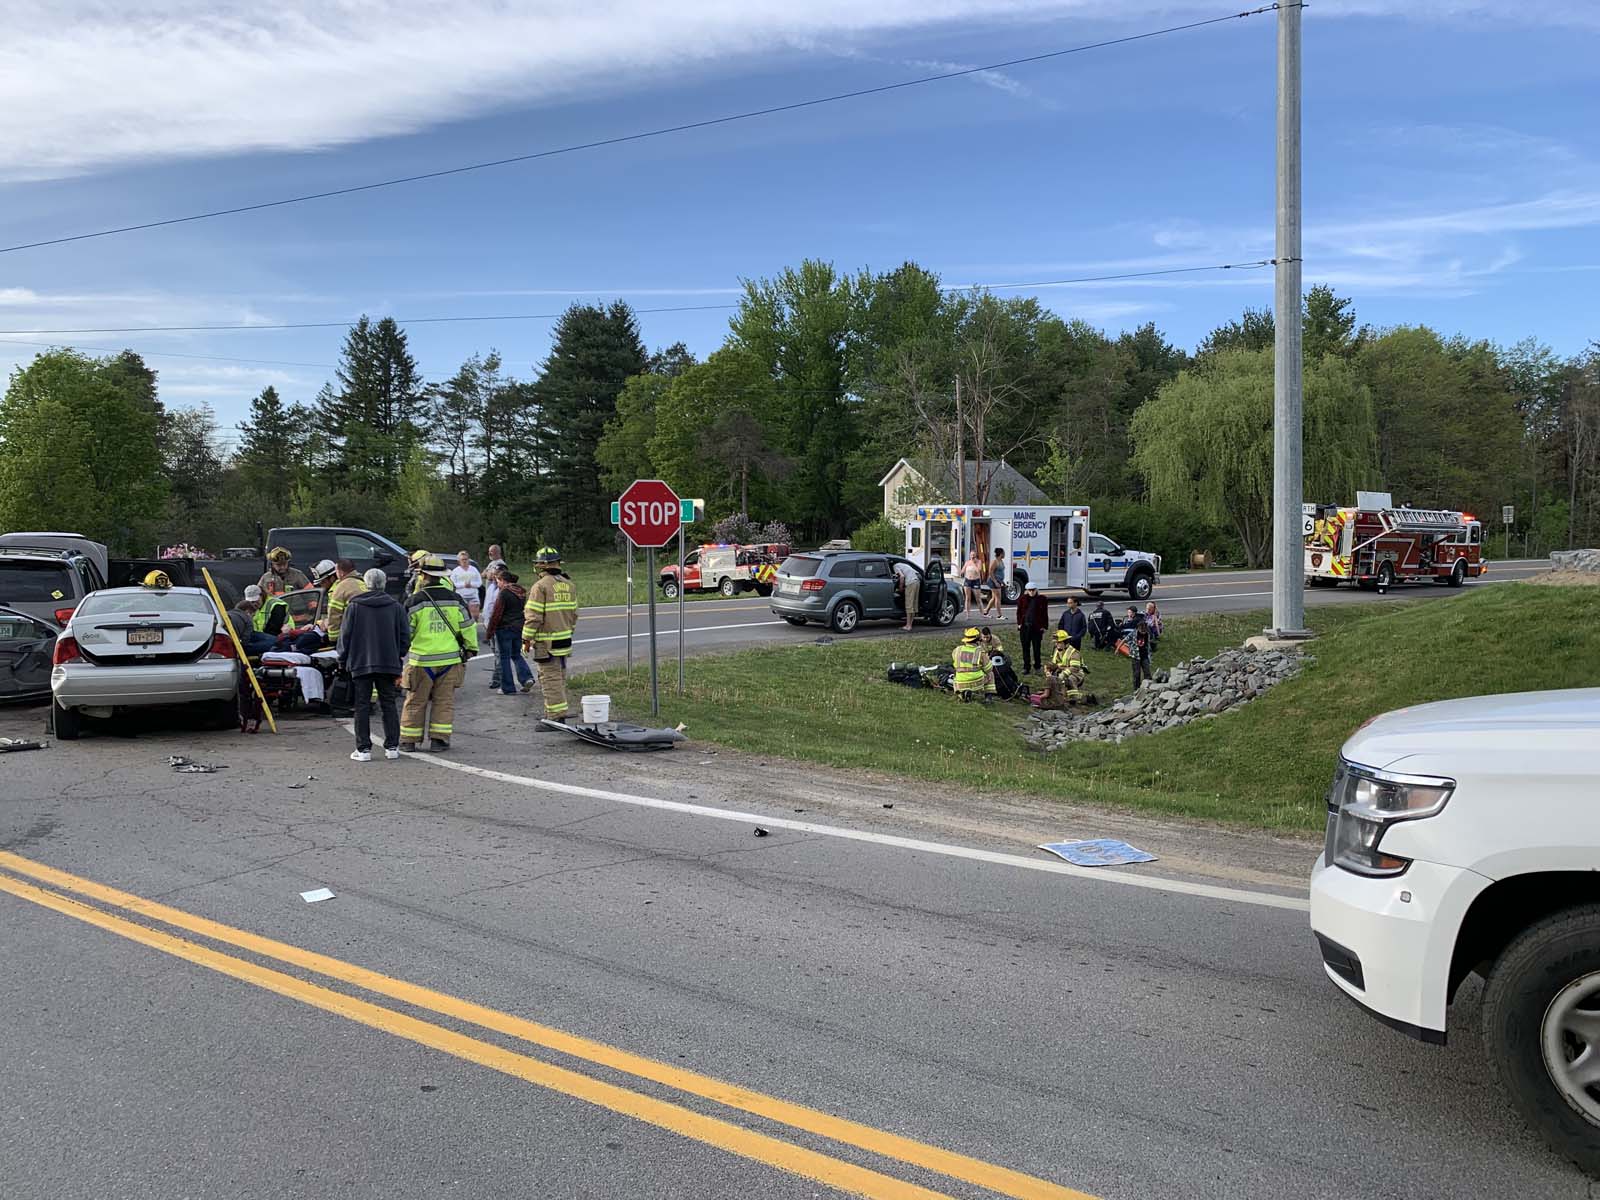 Assisted Maine Fire with motor vehicle accident at intersection of Route 26/East Maine Rd. - 5/14/23